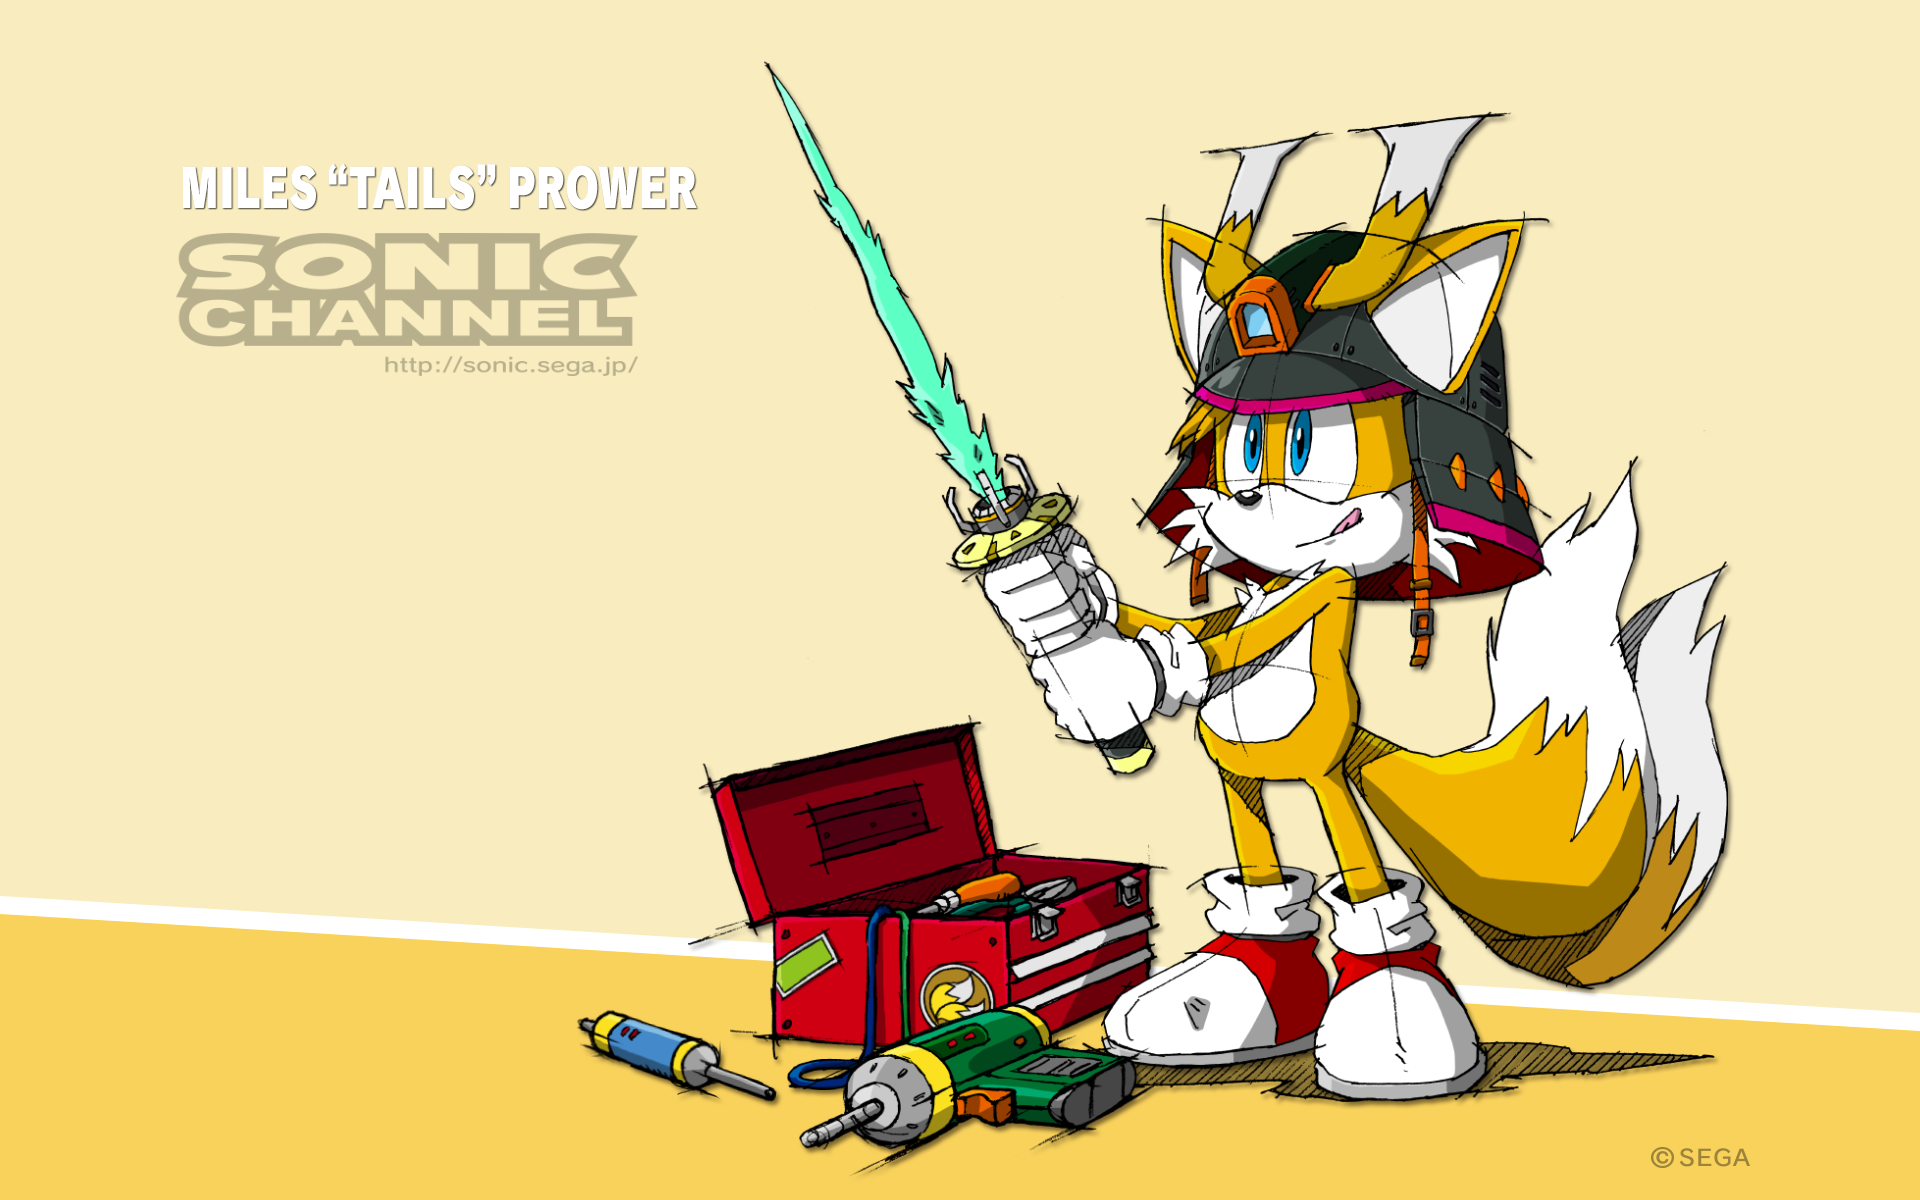 Tails Wallpapers